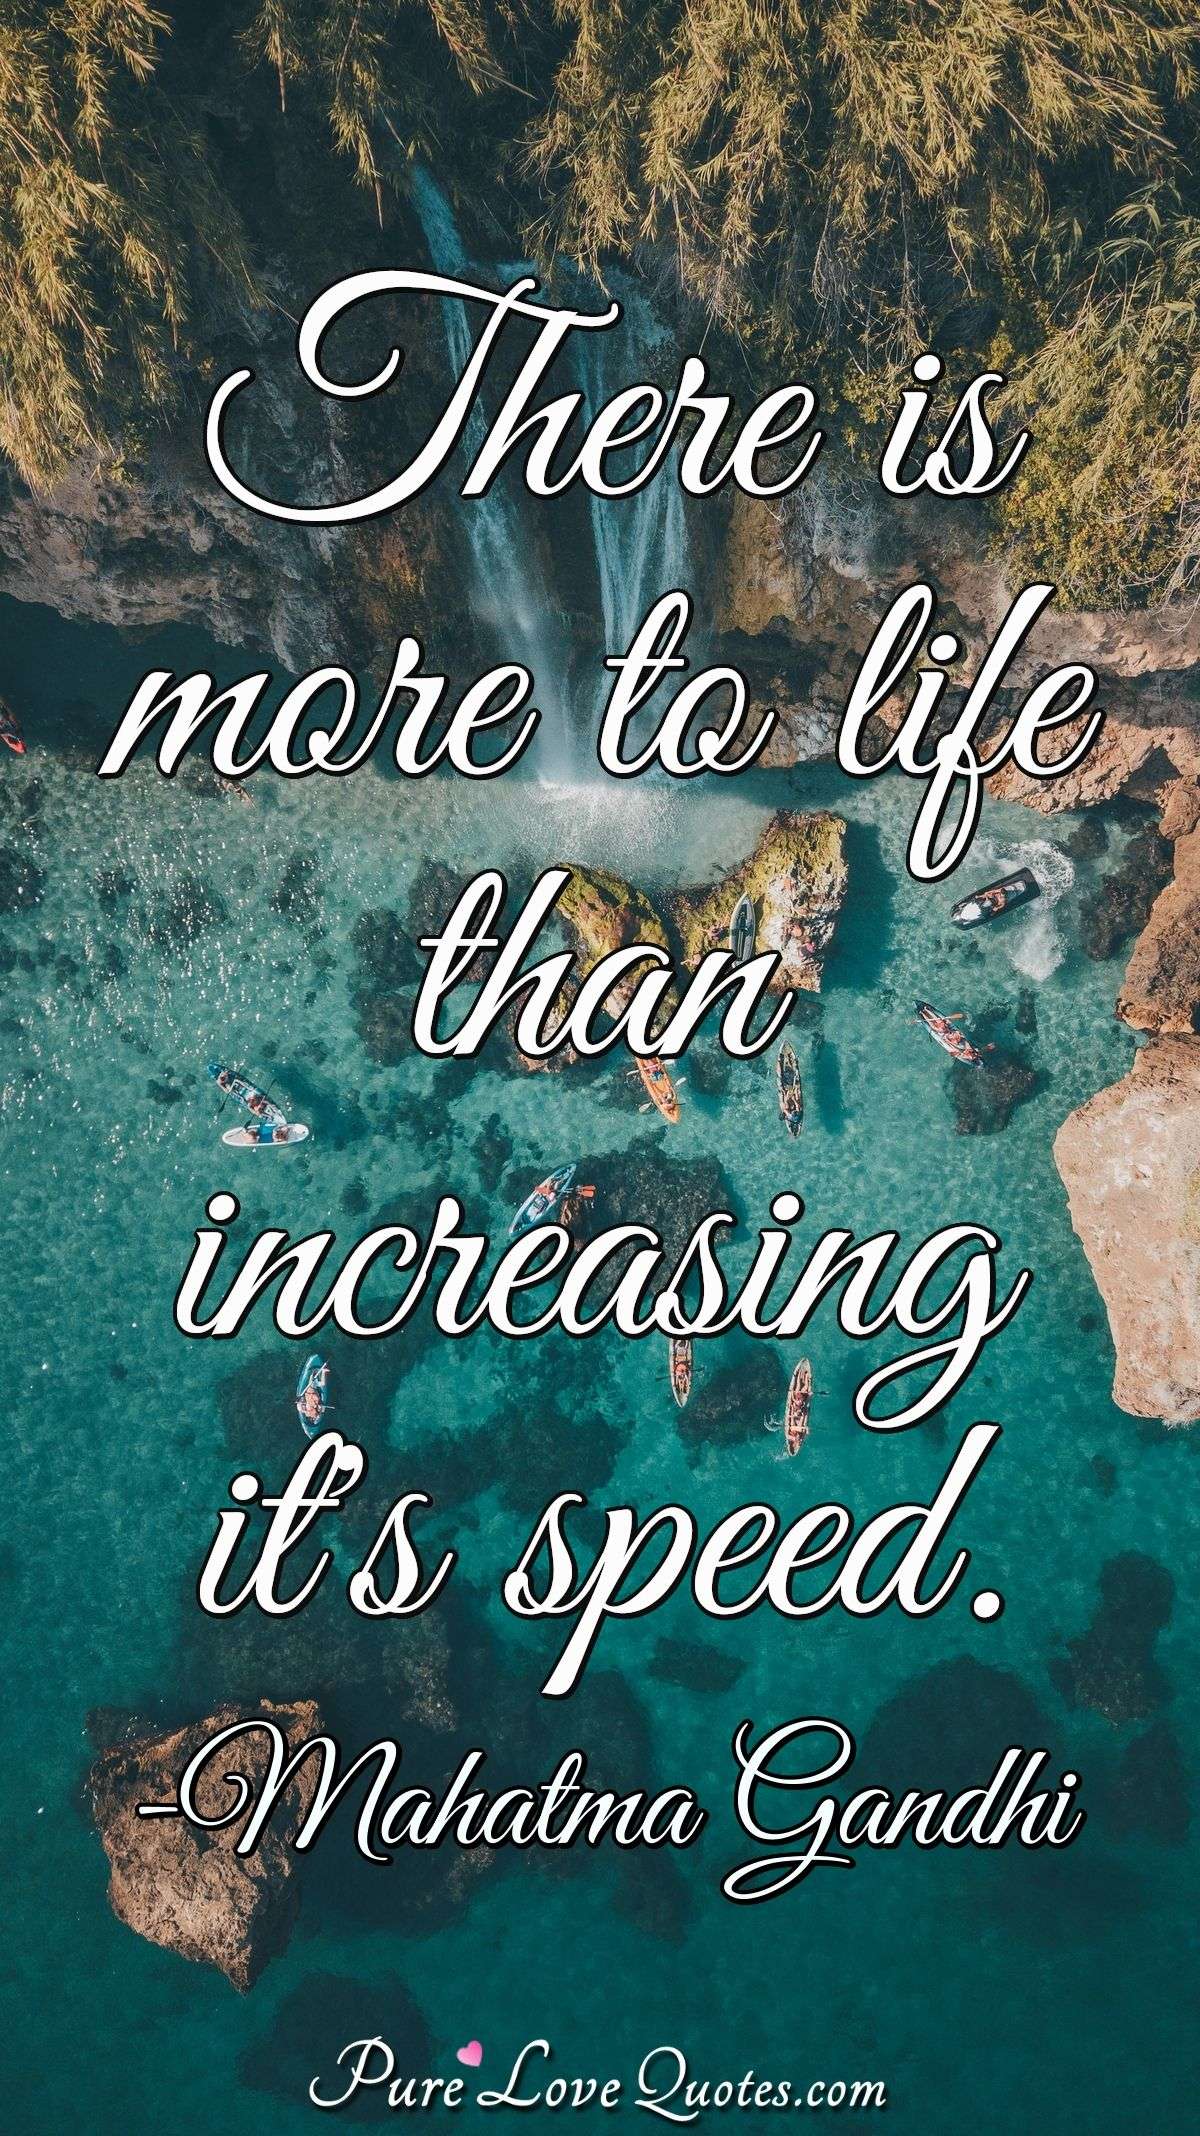 There is more to life than increasing it's speed. - Mahatma Gandhi